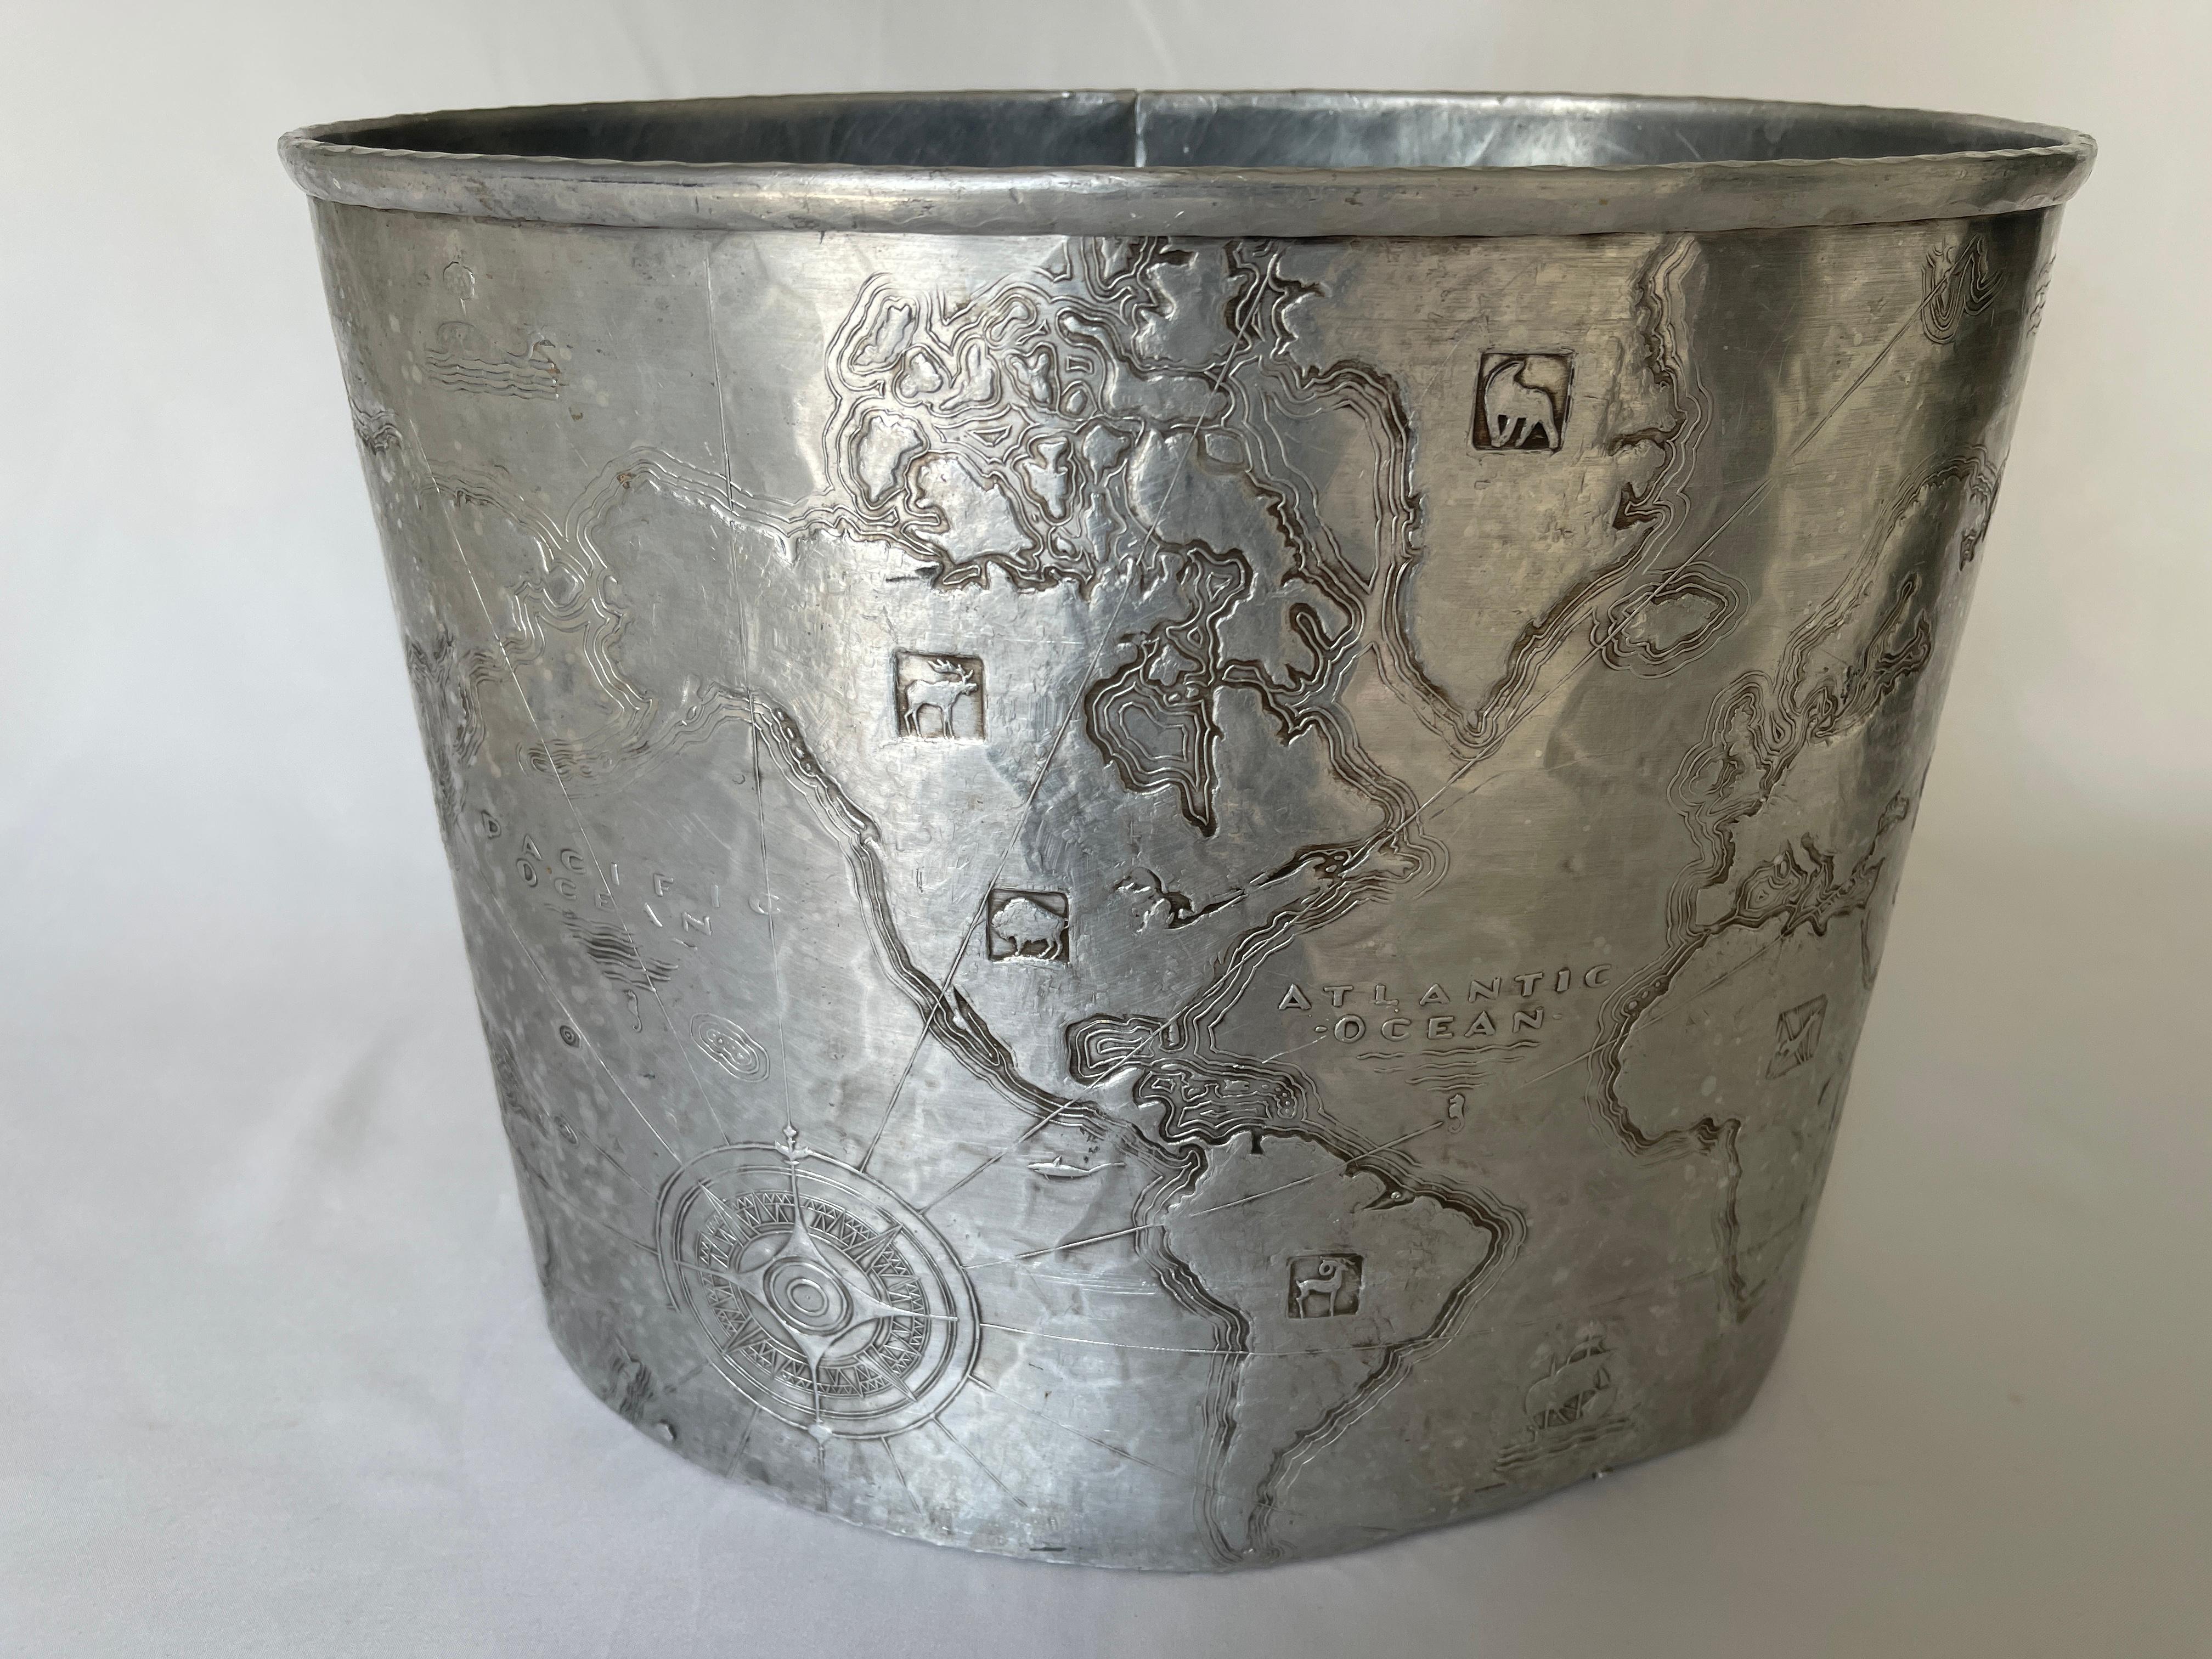 Art Deco hand hammered aluminum map of the world oval wastebasket 
by Arthur Armour, c. 1930's. As found condition.